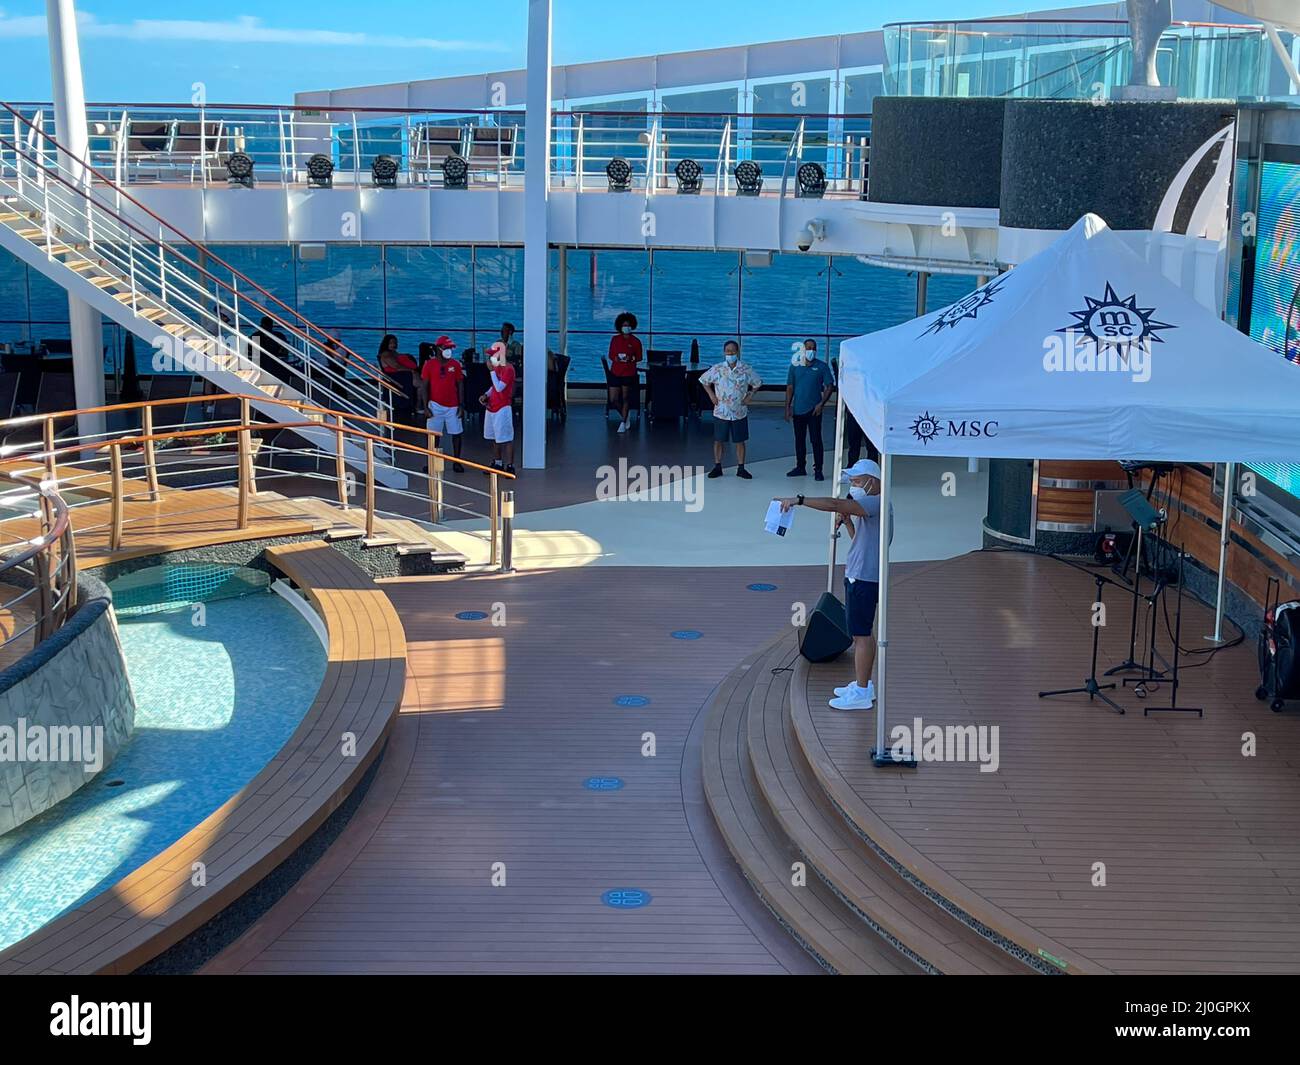 Orlando, FL USA - October 11, 2021:  The Entertainment at the main swimming pool area on the MSC Cruise Ship Divina in Port Canaveral, Florida., Stock Photo